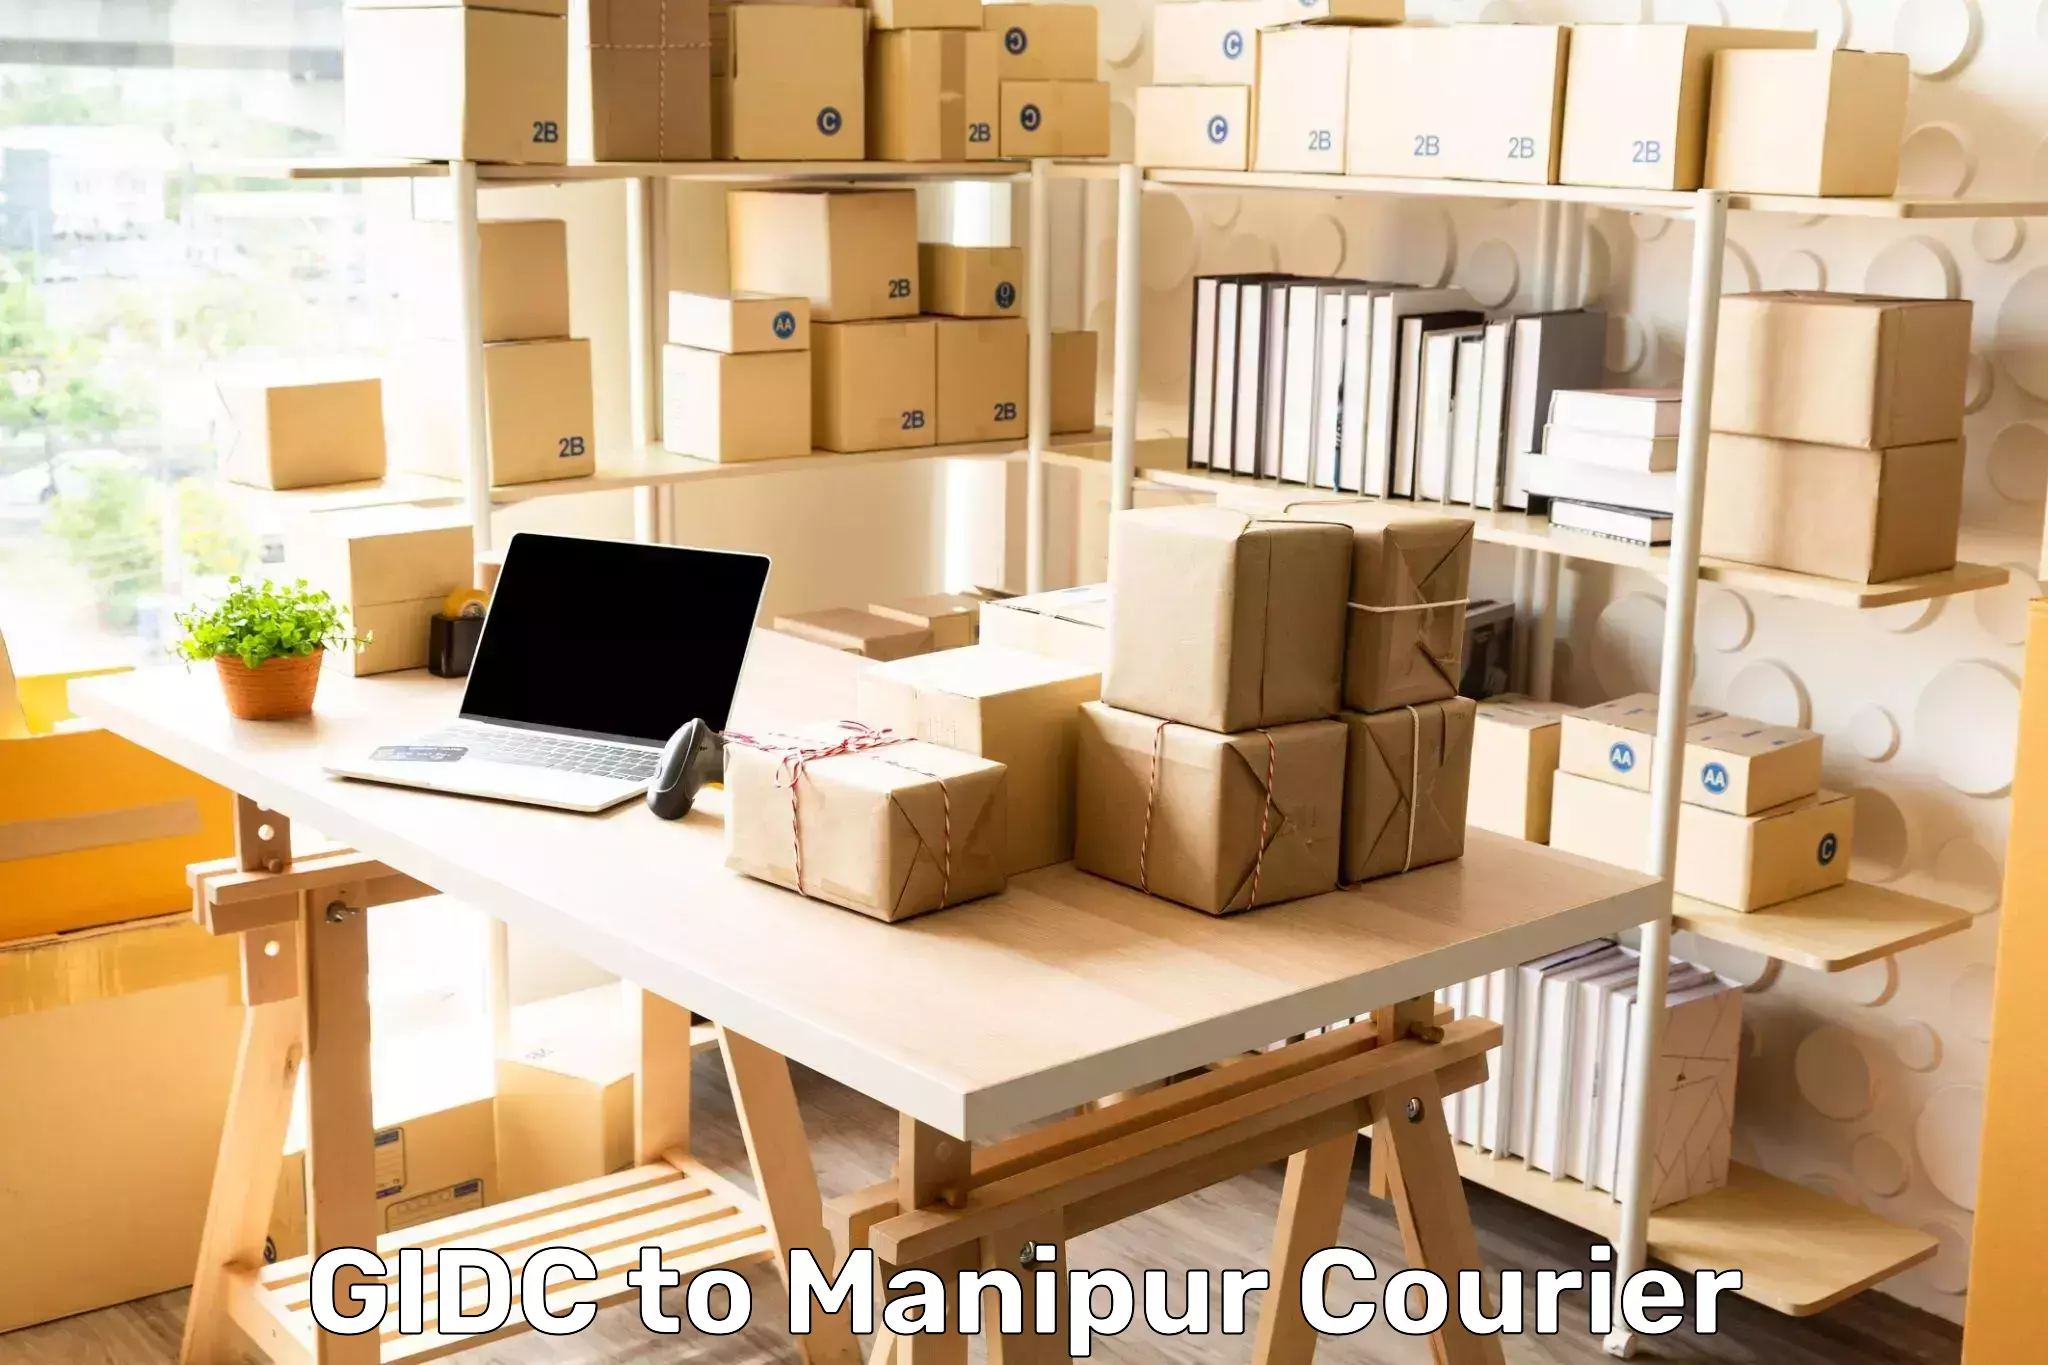 International courier networks GIDC to Manipur